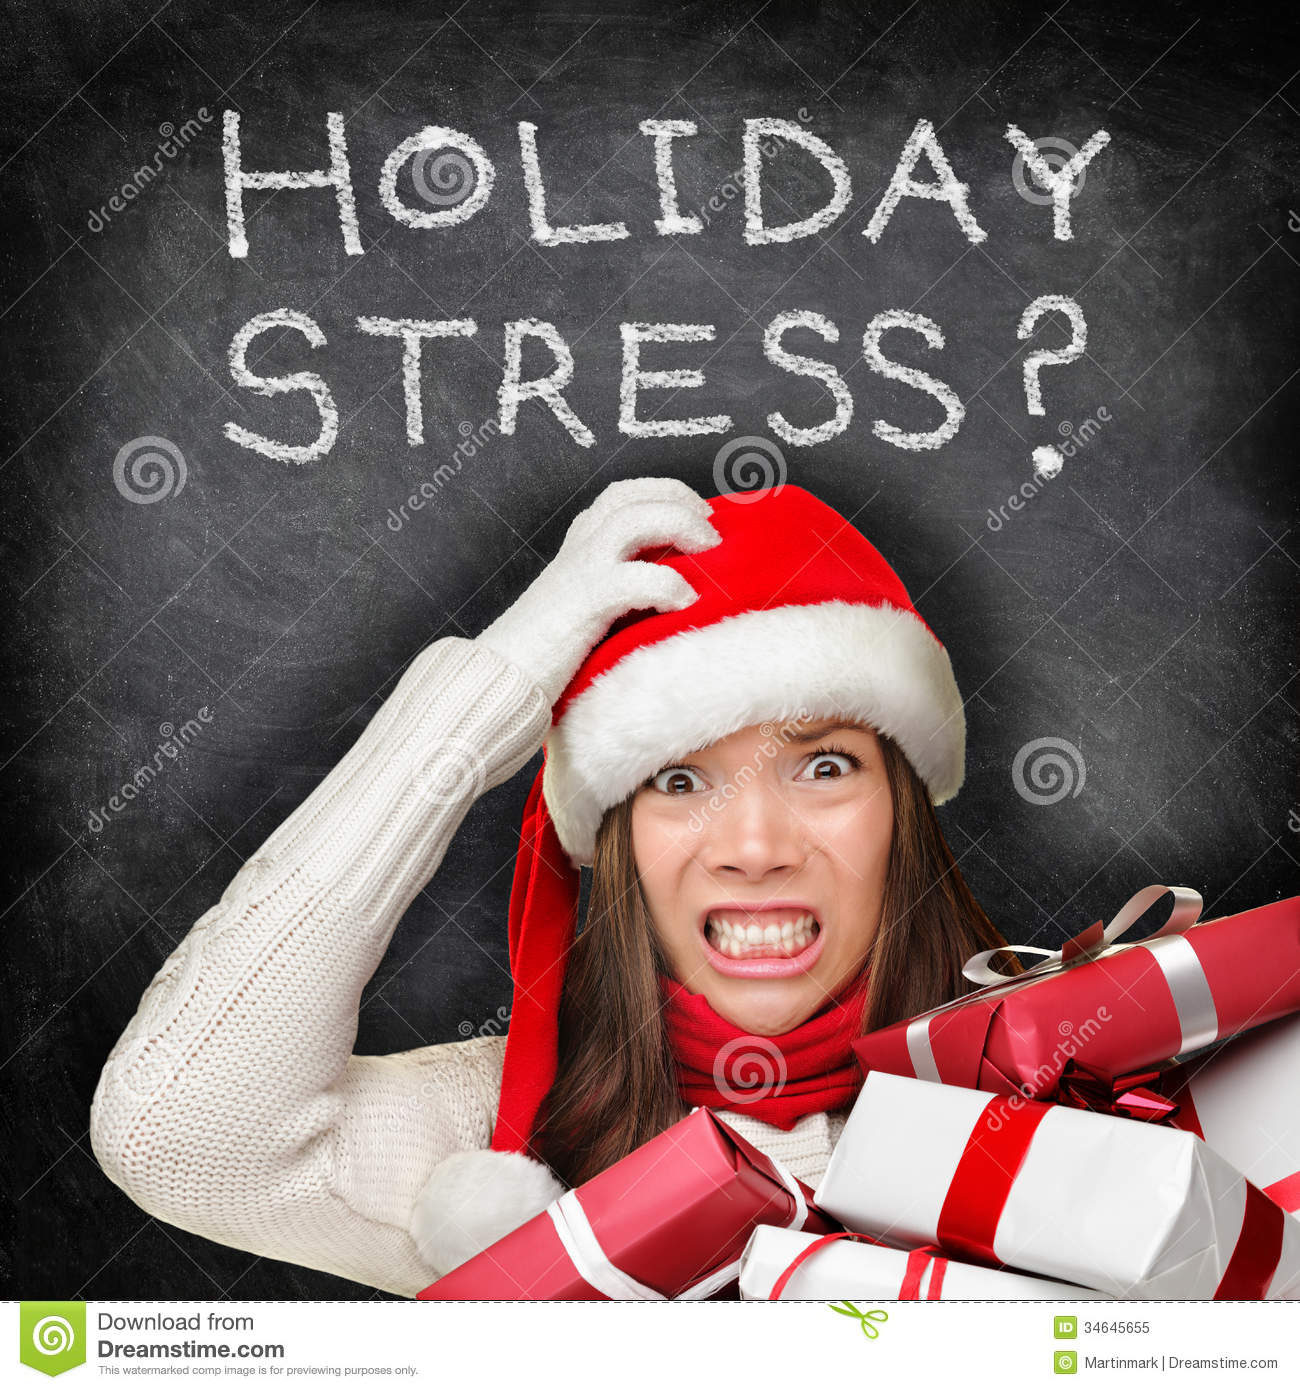 Christmas Holiday Stress   Stressed Shopping Gifts Royalty Free Stock